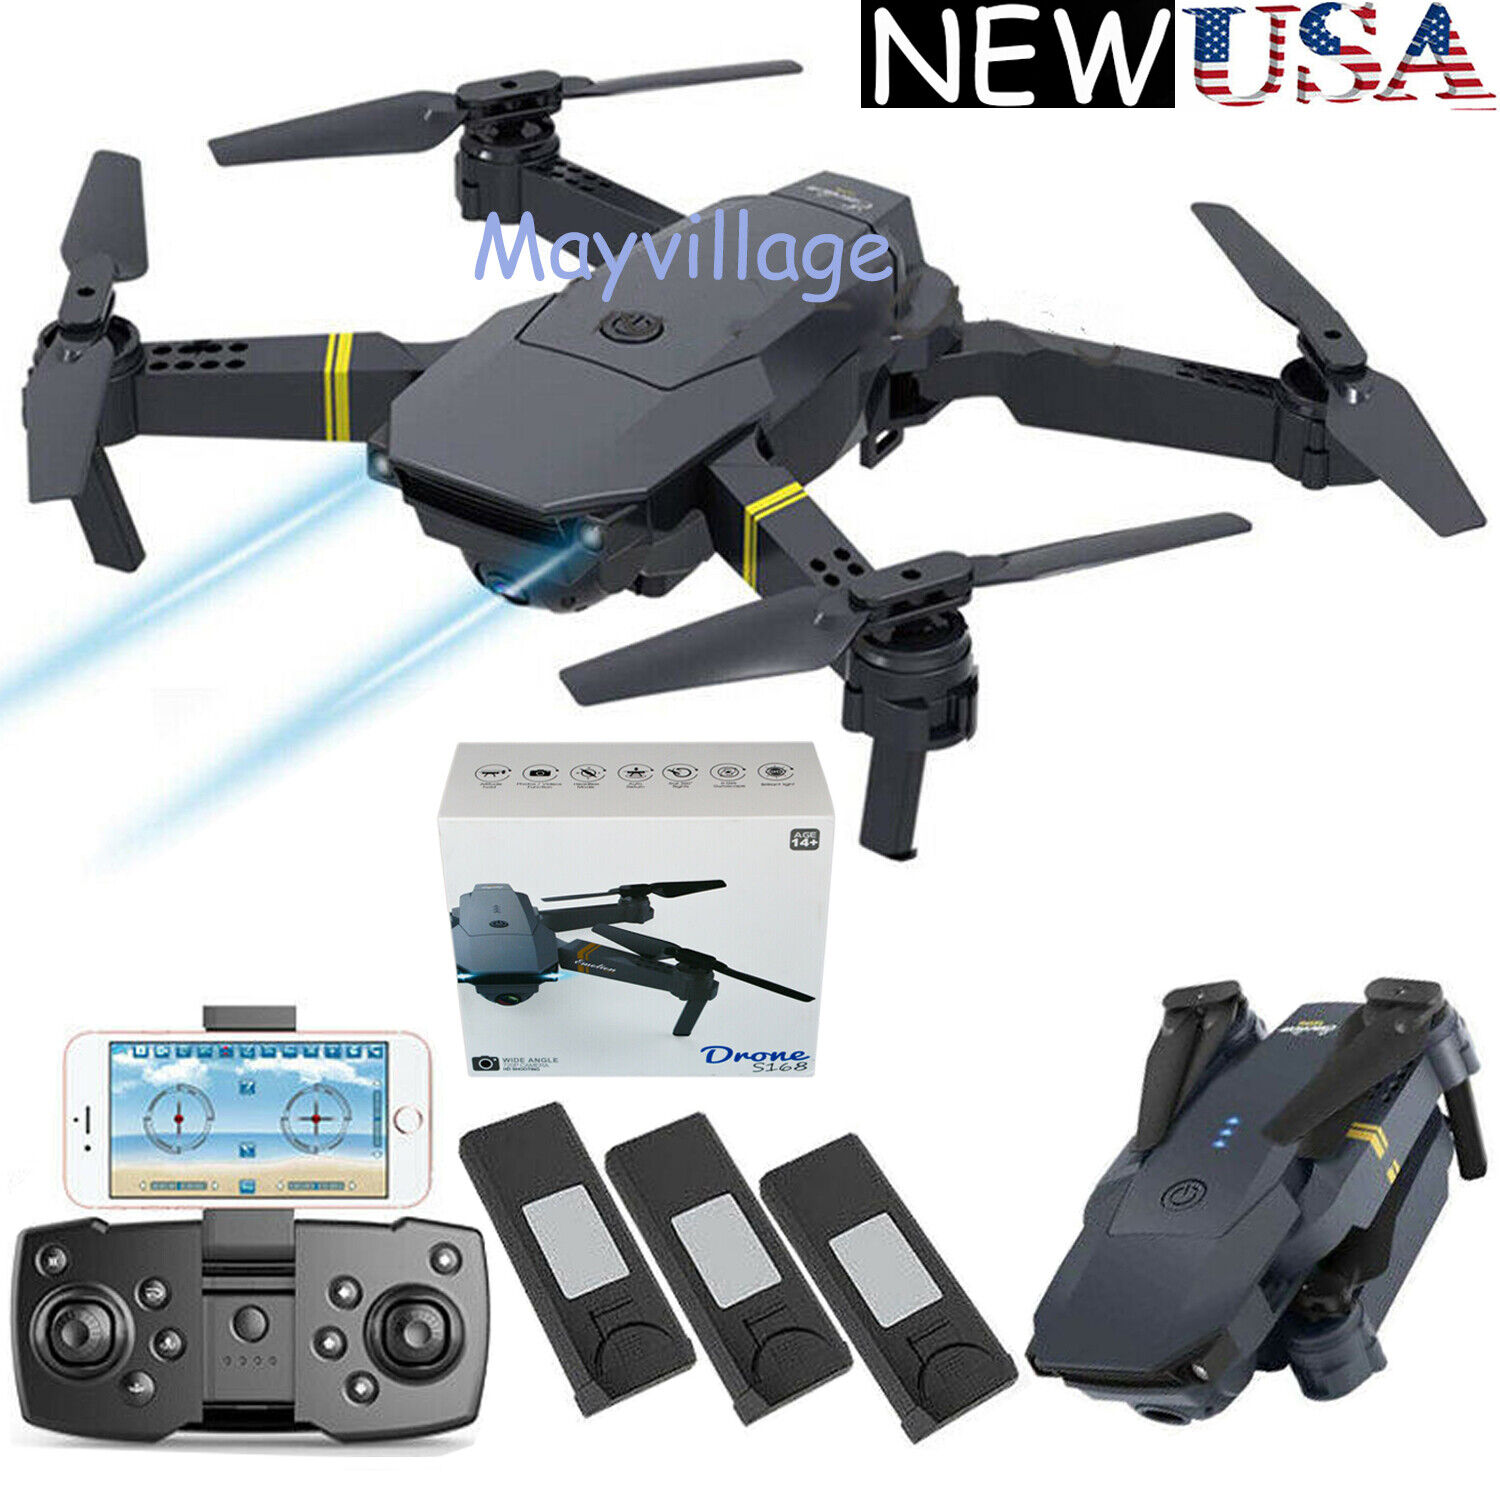 RC Drone 4K HD Camera FPV WiFi Aircraft Foldable Quadcopter Selfie Toy 3 Battery